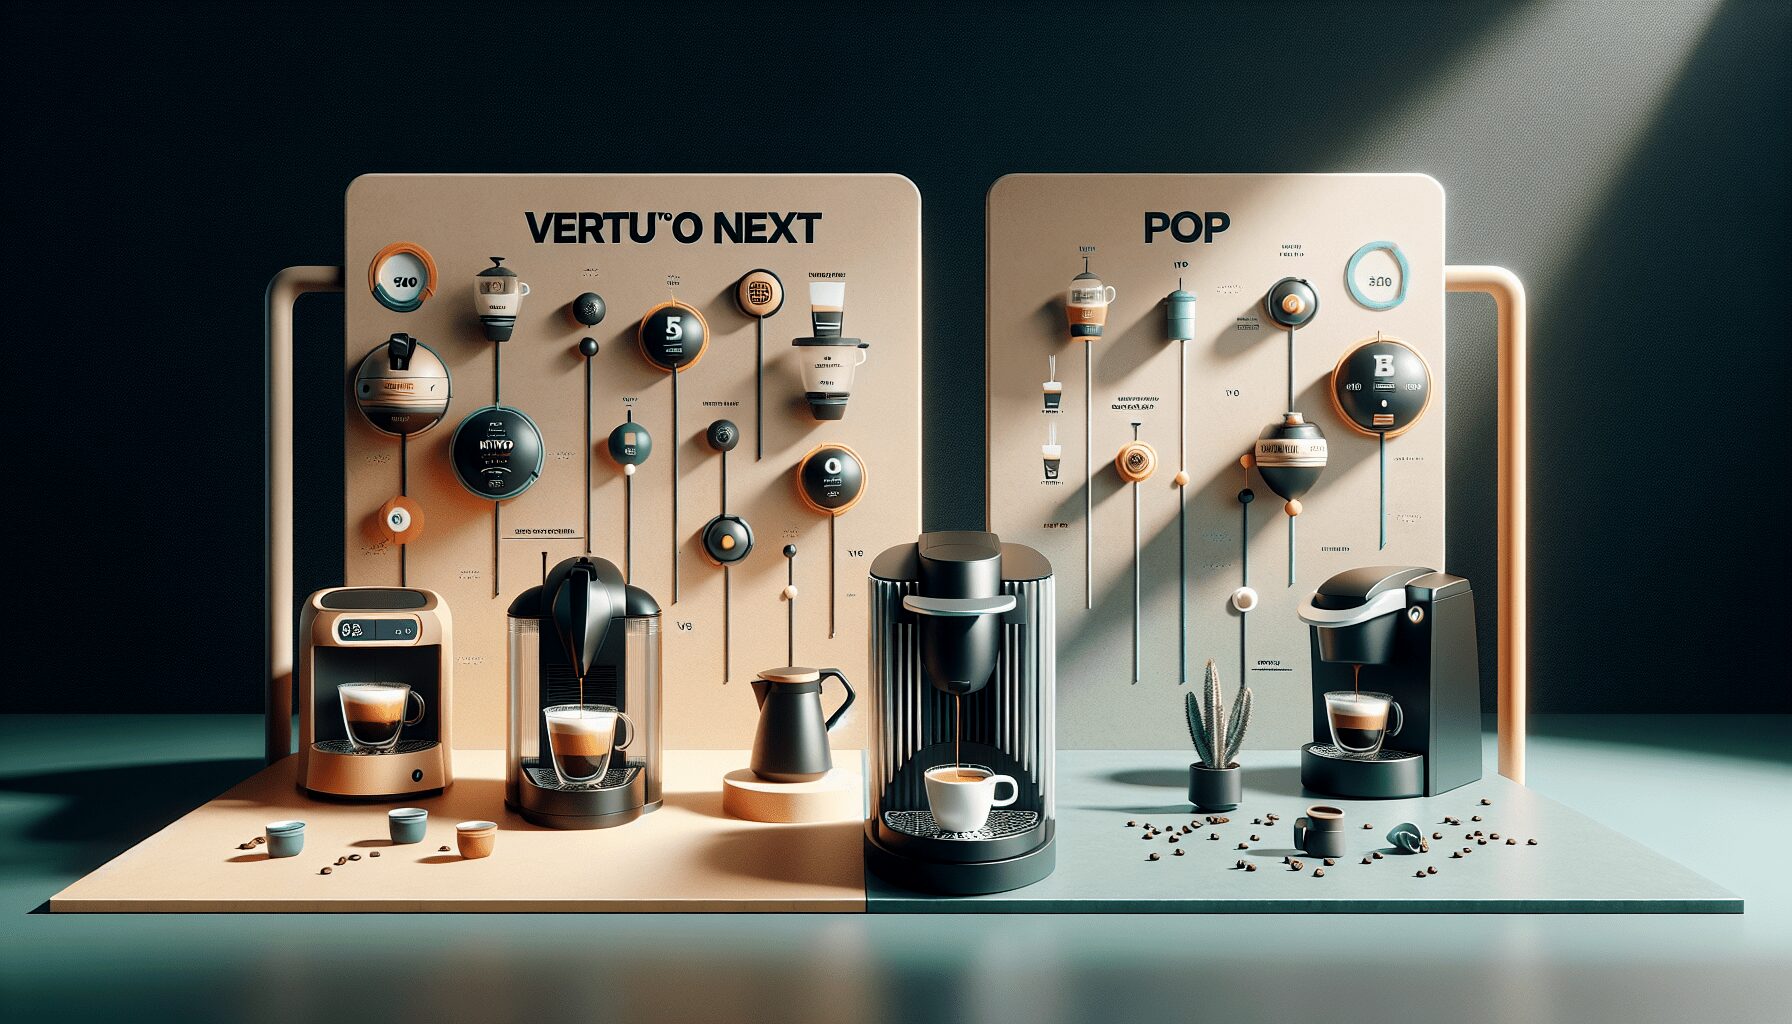 Comparing Vertuo Next and Pop: Which One is Best?